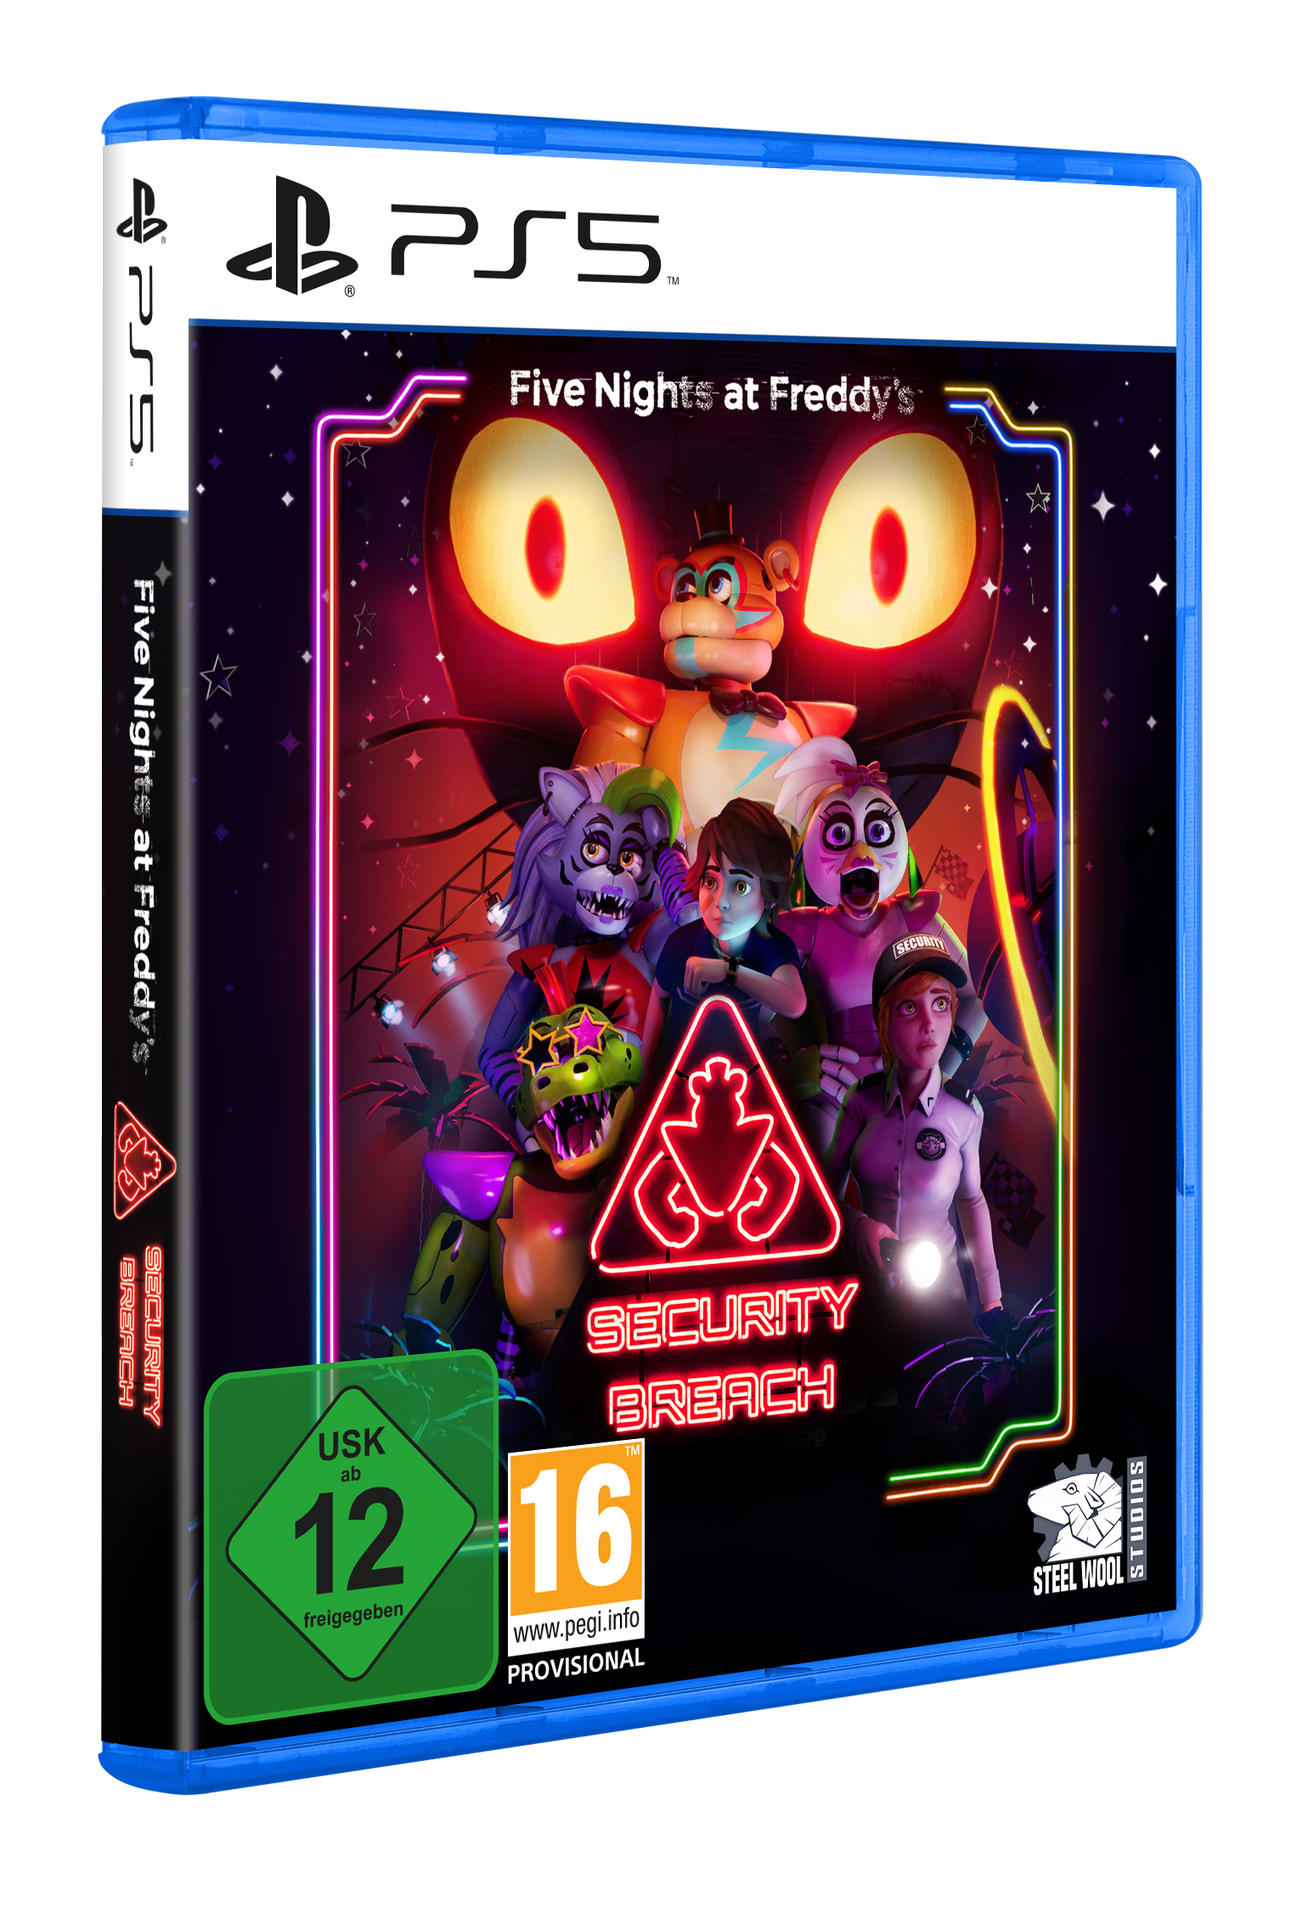 Nights Five Security 5] Breach - Freddy\'s: at [PlayStation